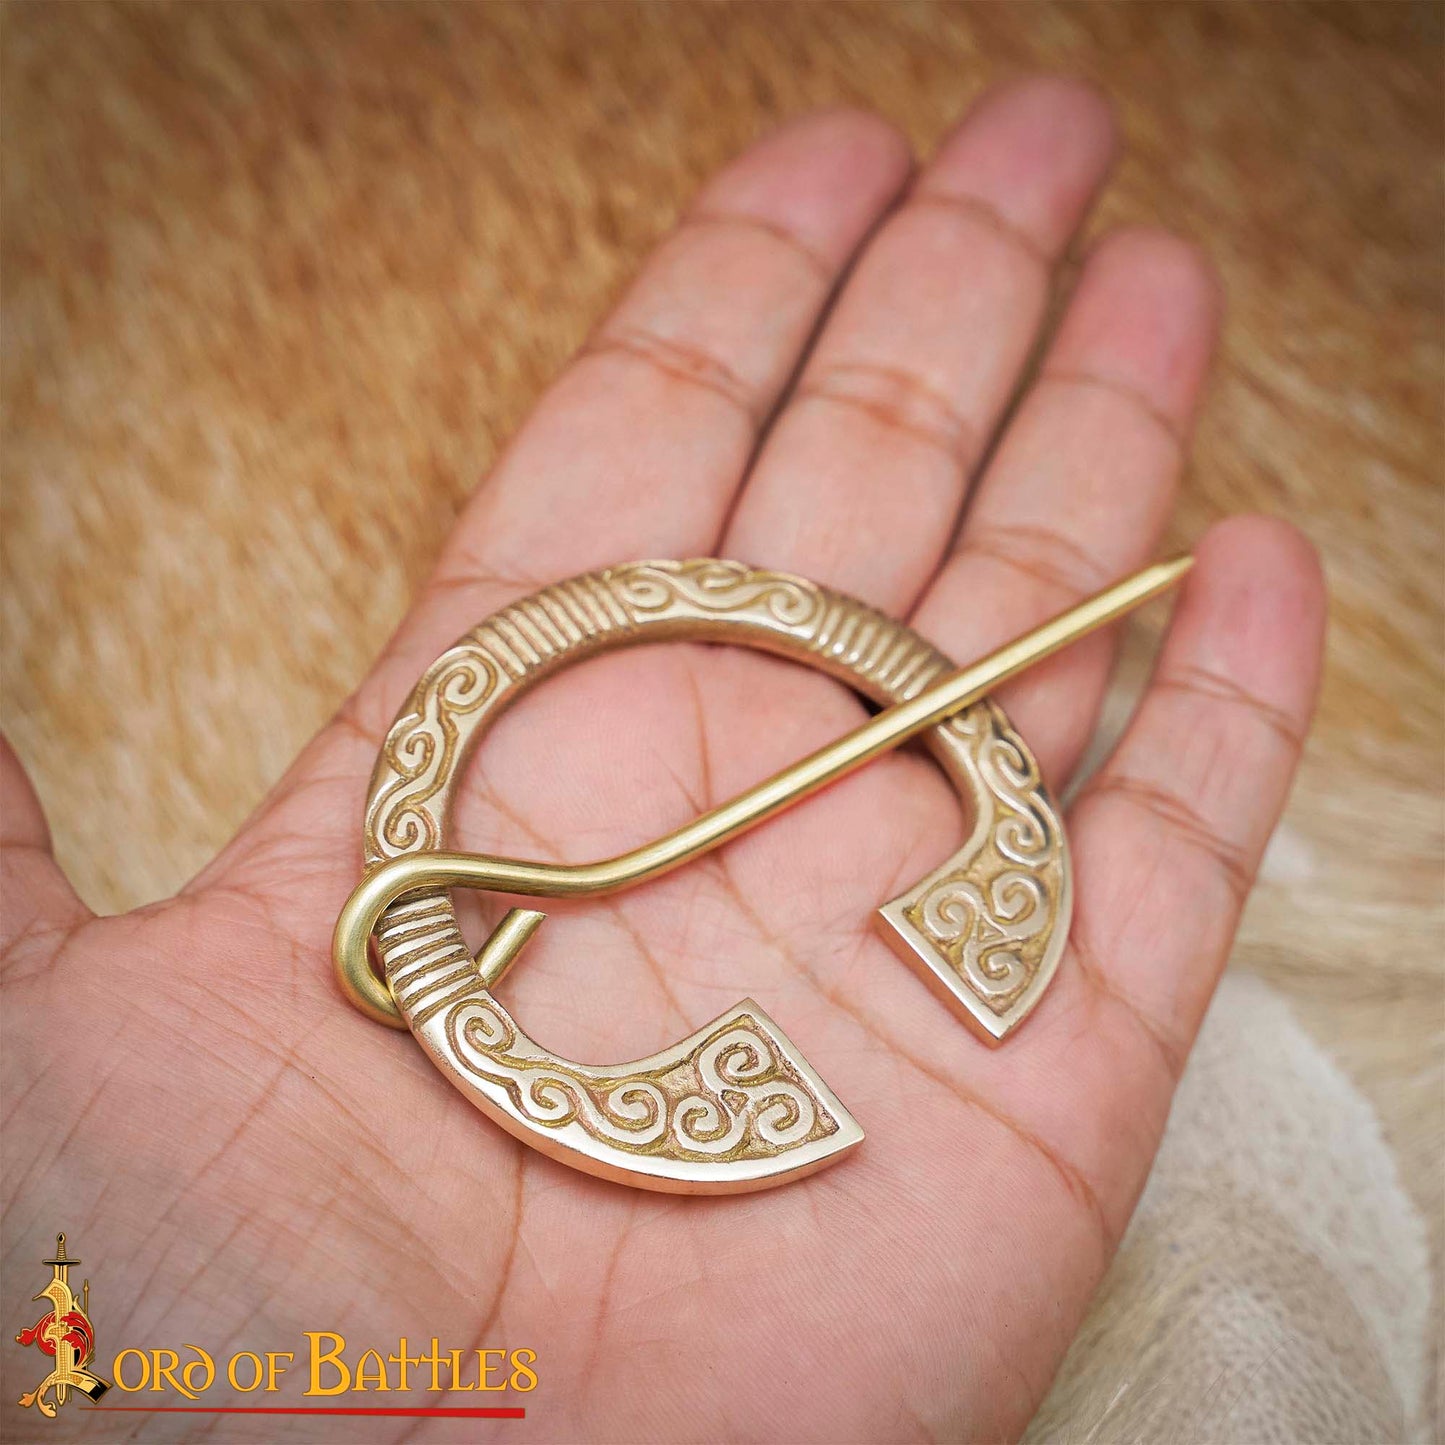 Irish Penannular Brooch made out of Solid Brass